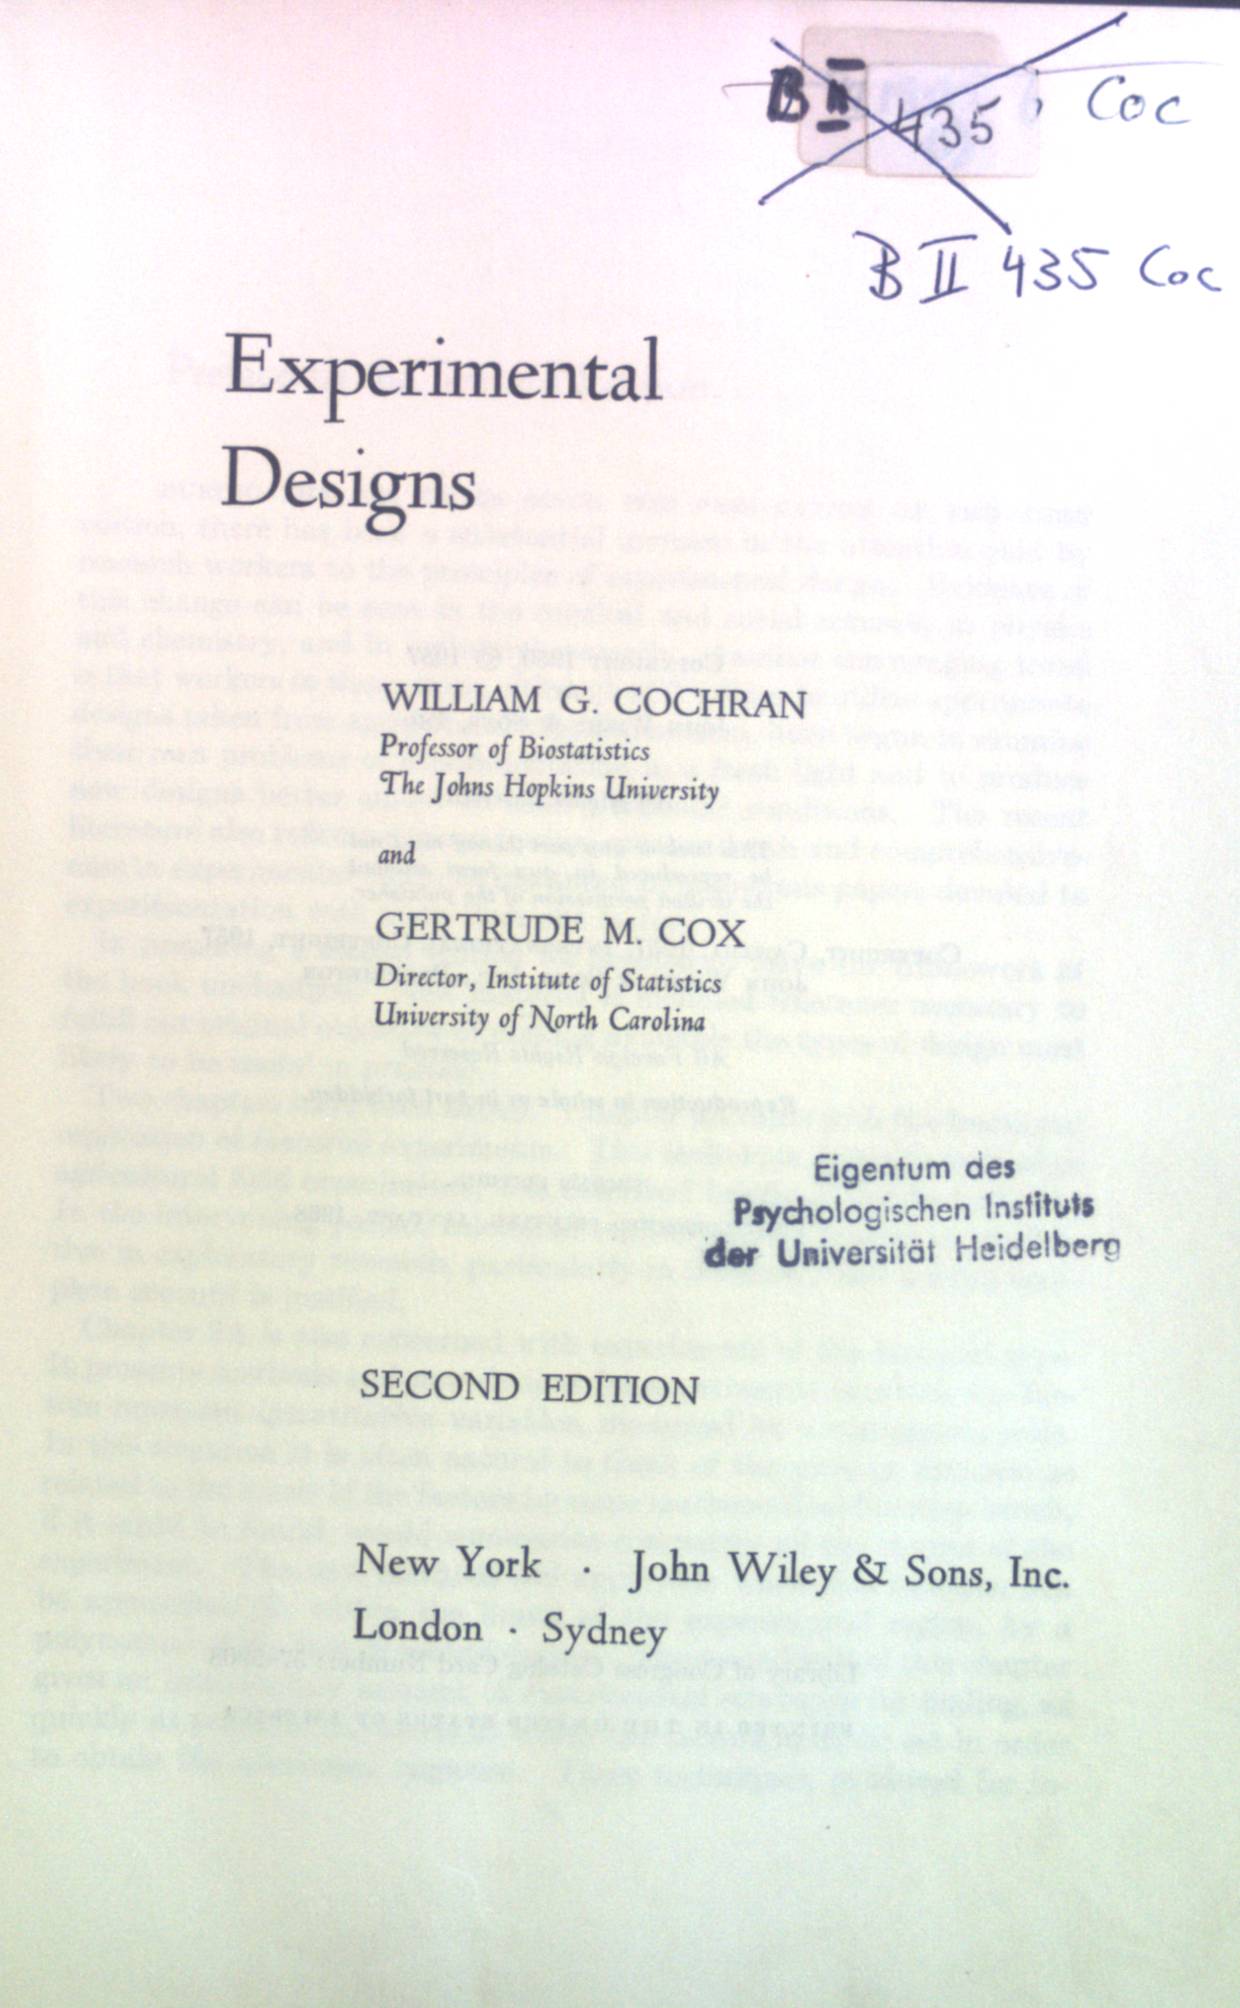 Experimental Designs. A Wiley Publication in Applied Statistics; Wiley Series in Probability and Mathematical Statistics. - Cochran, William G. and Gertrude M. Cox